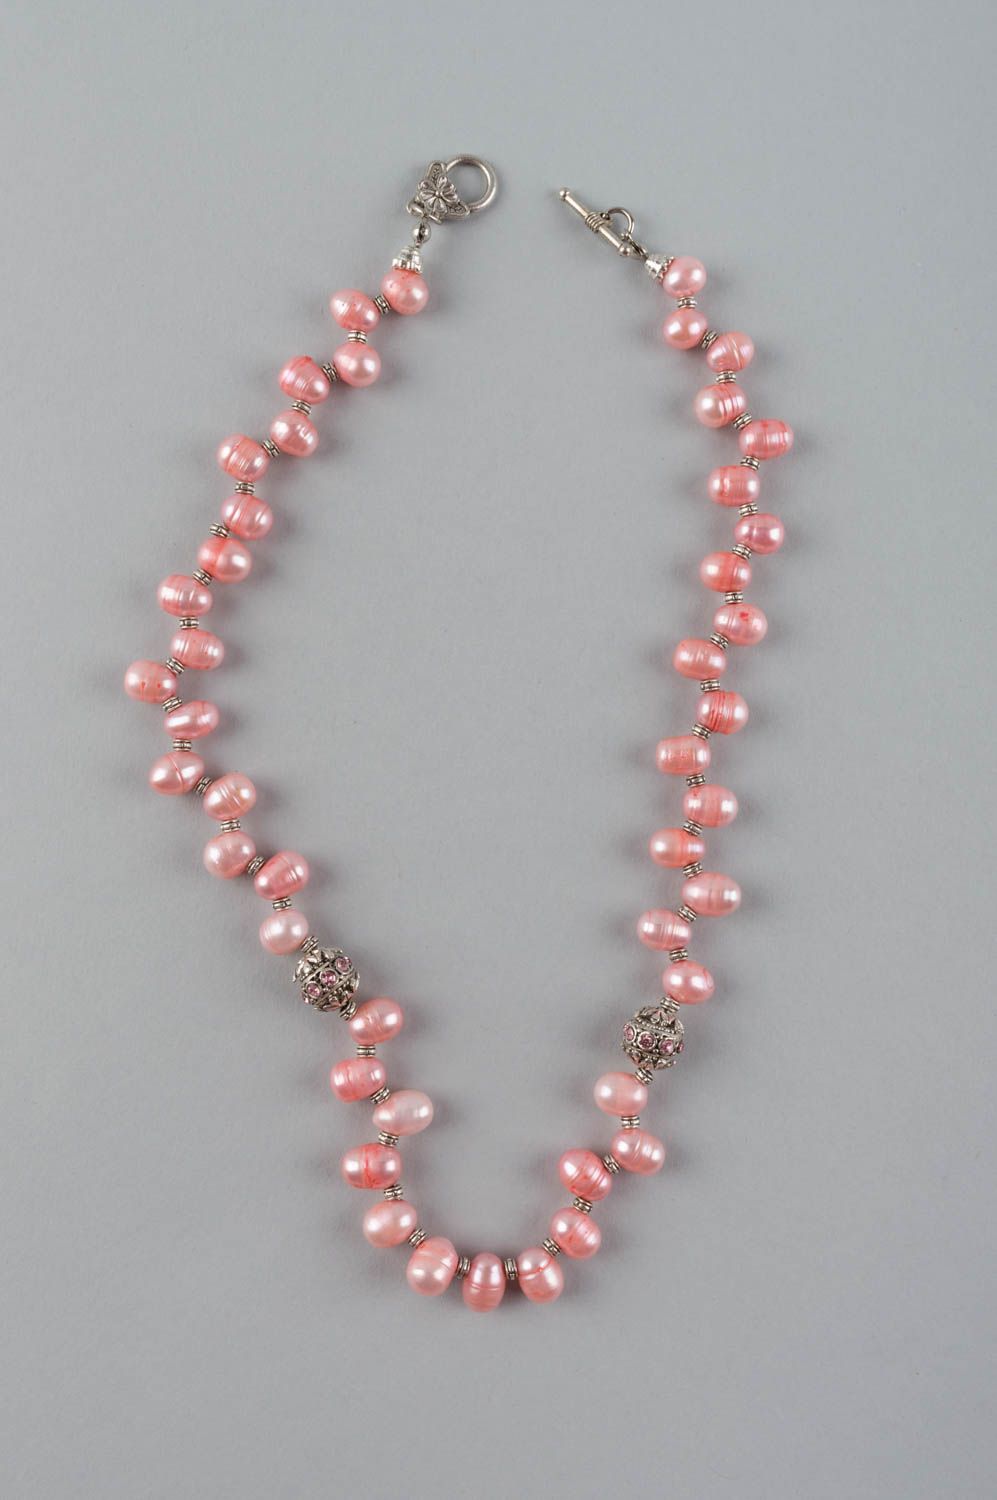 Set of handmade beaded pink pearl jewelry 2 items wrist bracelet and necklace photo 3